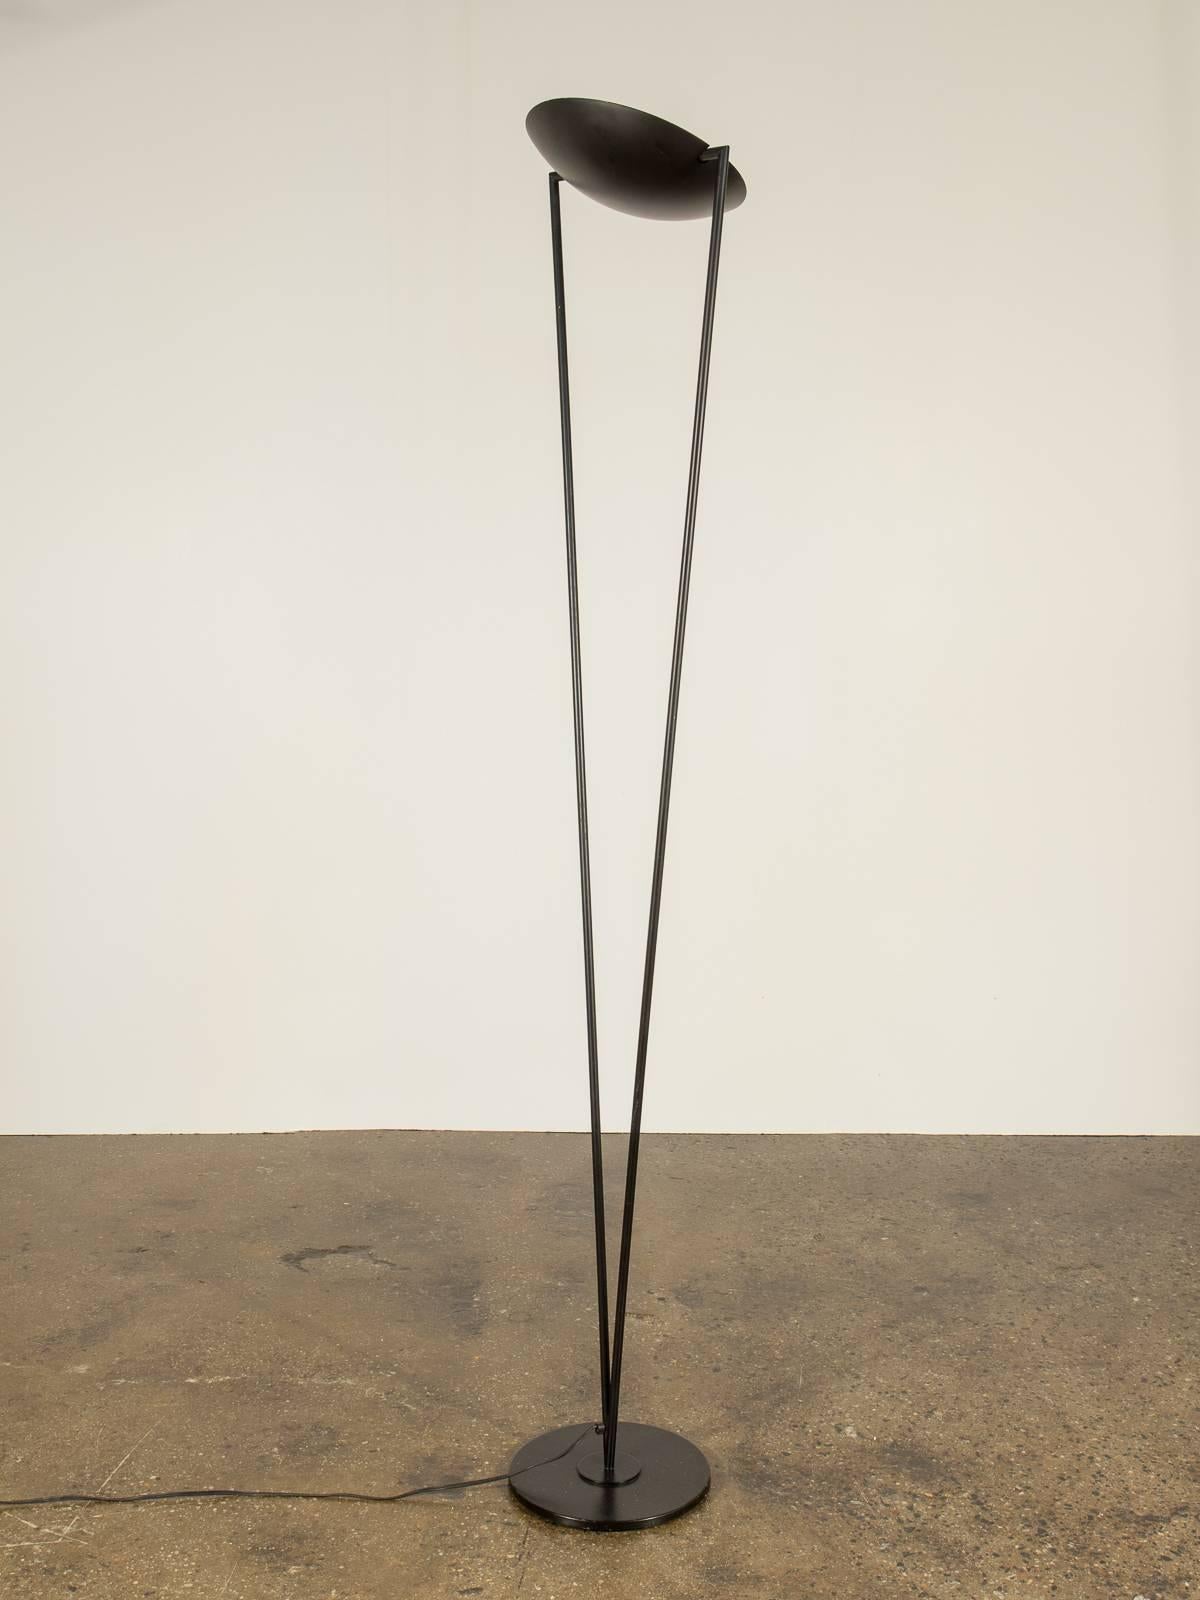 Striking black modernist floor lamp. Circular shade is fully adjustable. Dimmer switch marked Relco, Italy. In perfect working condition. 1970s.

The shade is 11.25